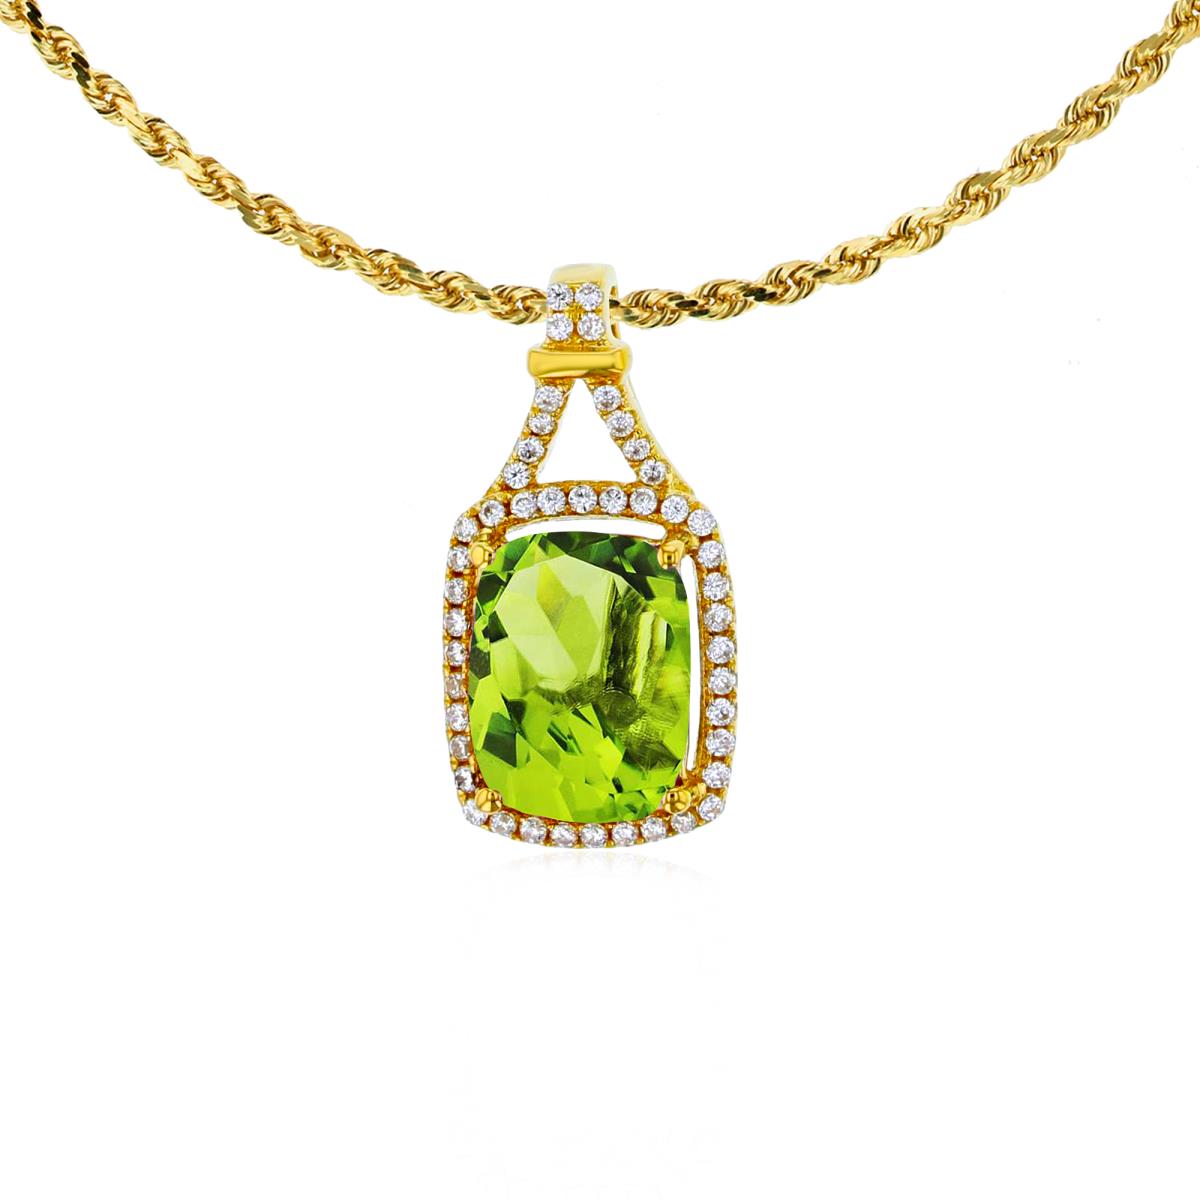 10K Yellow Gold 8x6mm Cushion Peridot & 0.13 CTTW Rd Diamonds Halo 18" Rope Chain Necklace